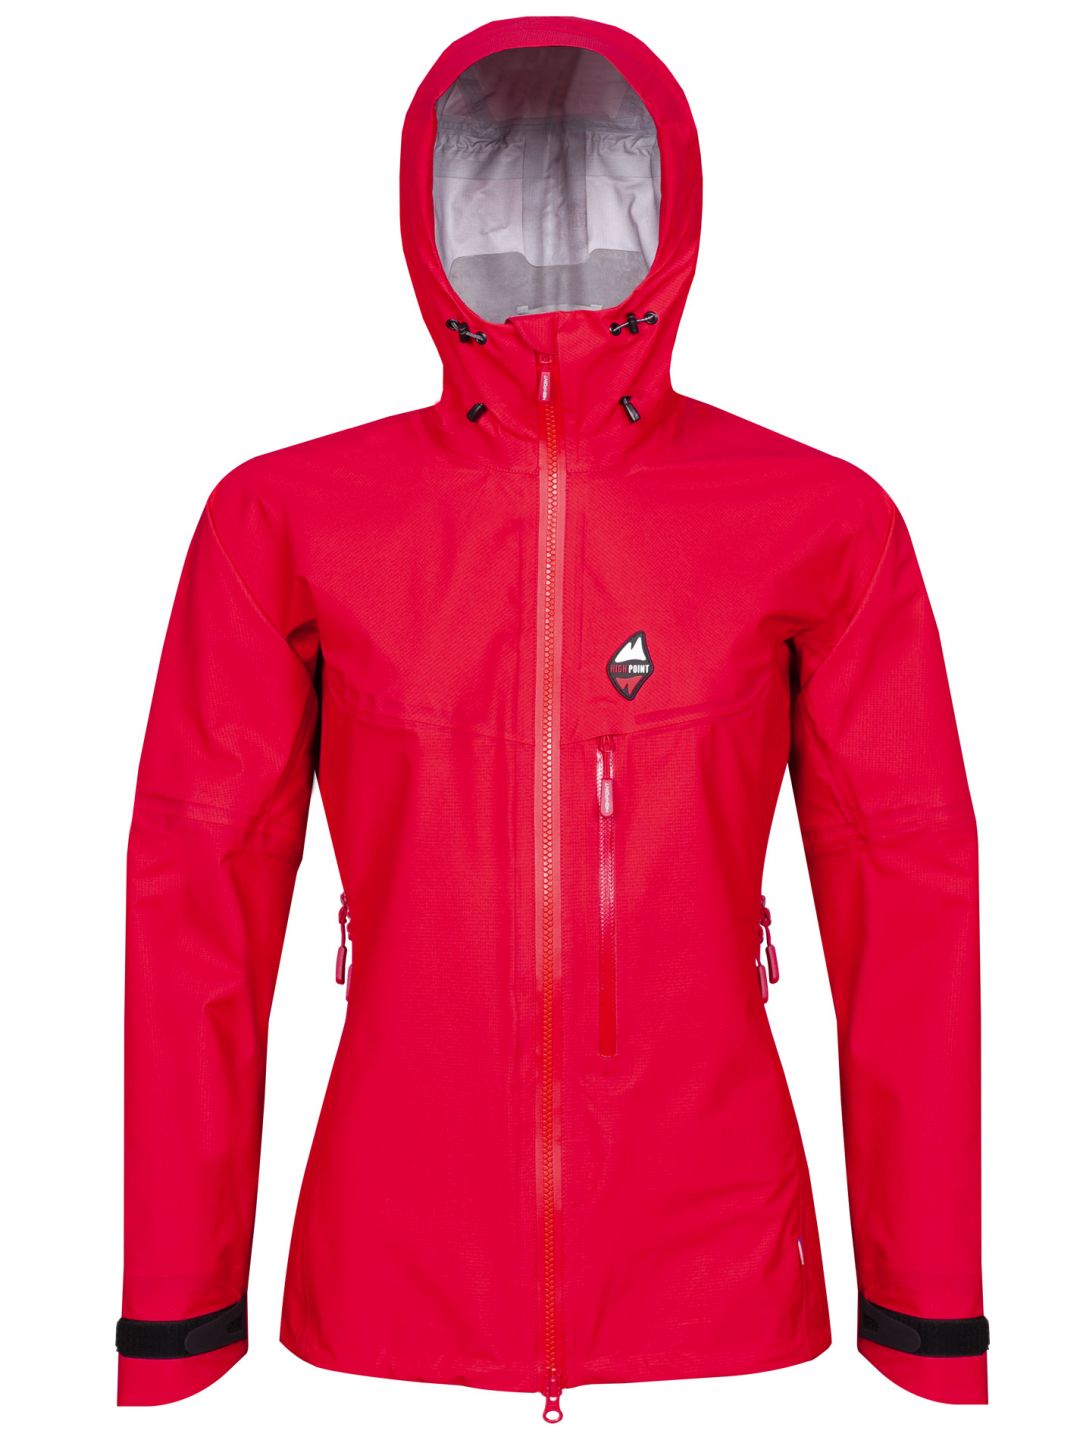 HIGH POINT CLIFF Lady jacket red varianta: L